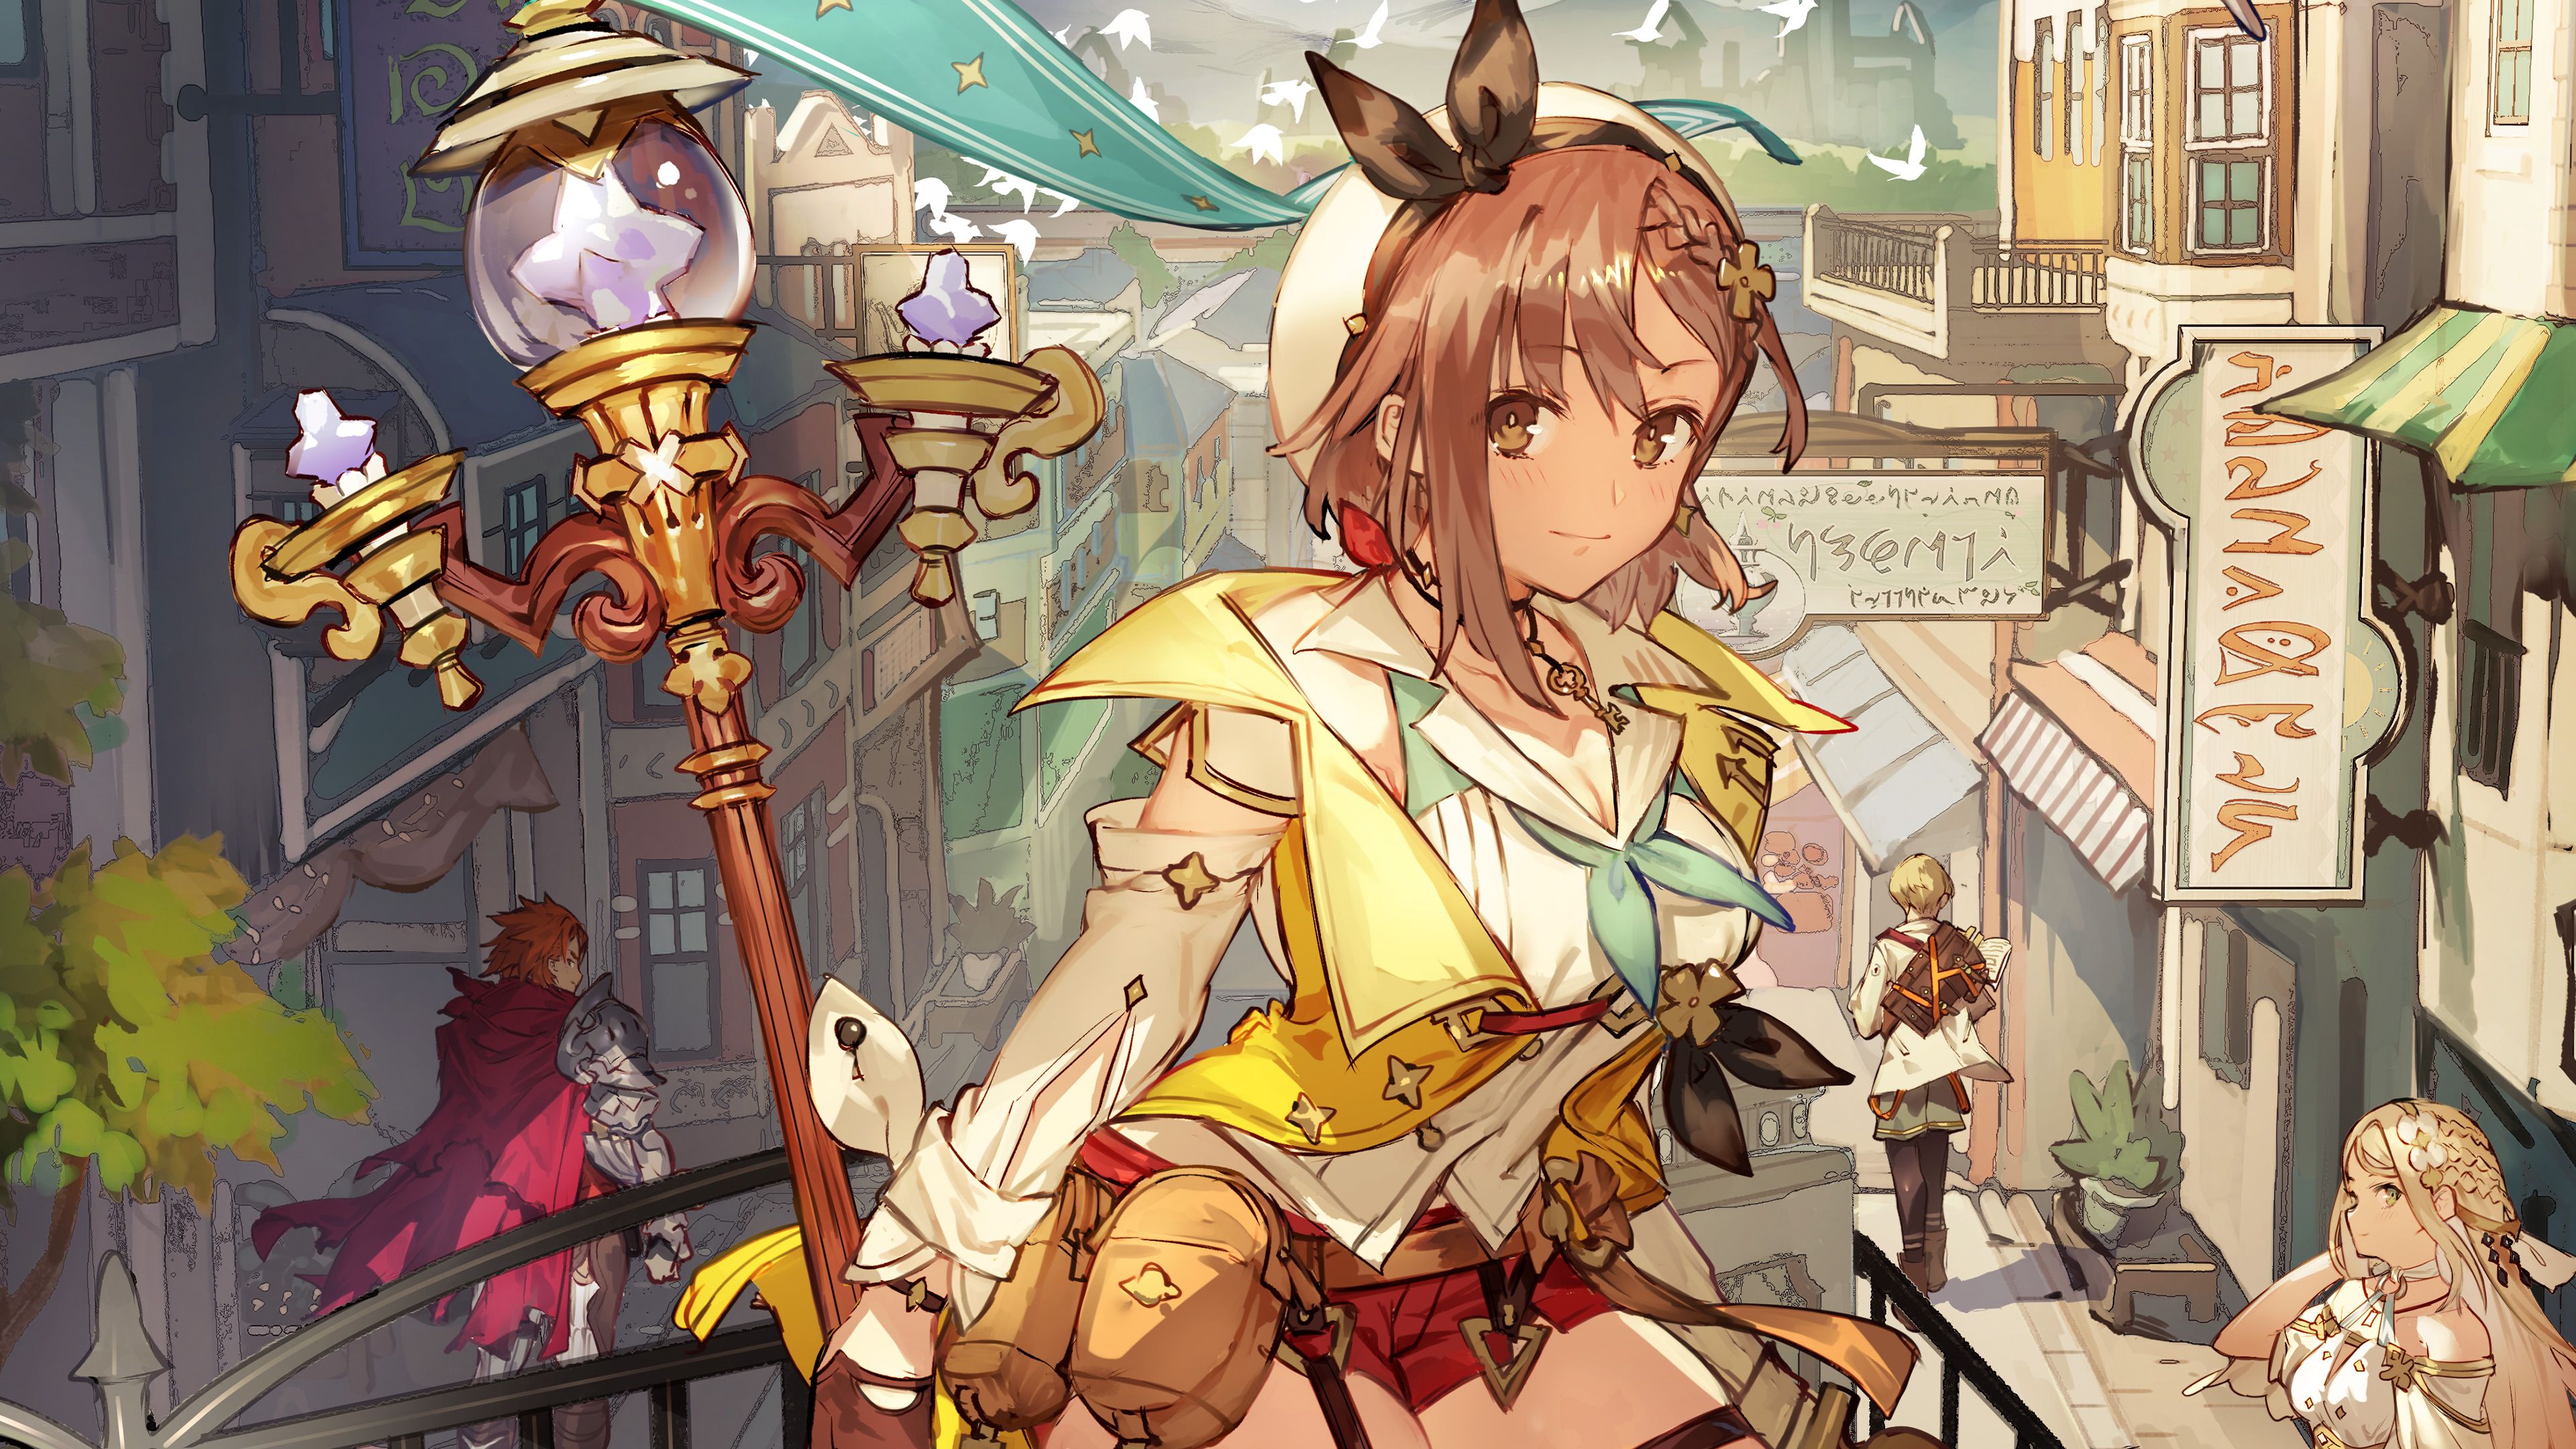 Atelier Ryza 2: Lost Legends & the Secret Fairy (Simplified Chinese, Korean, Traditional Chinese)